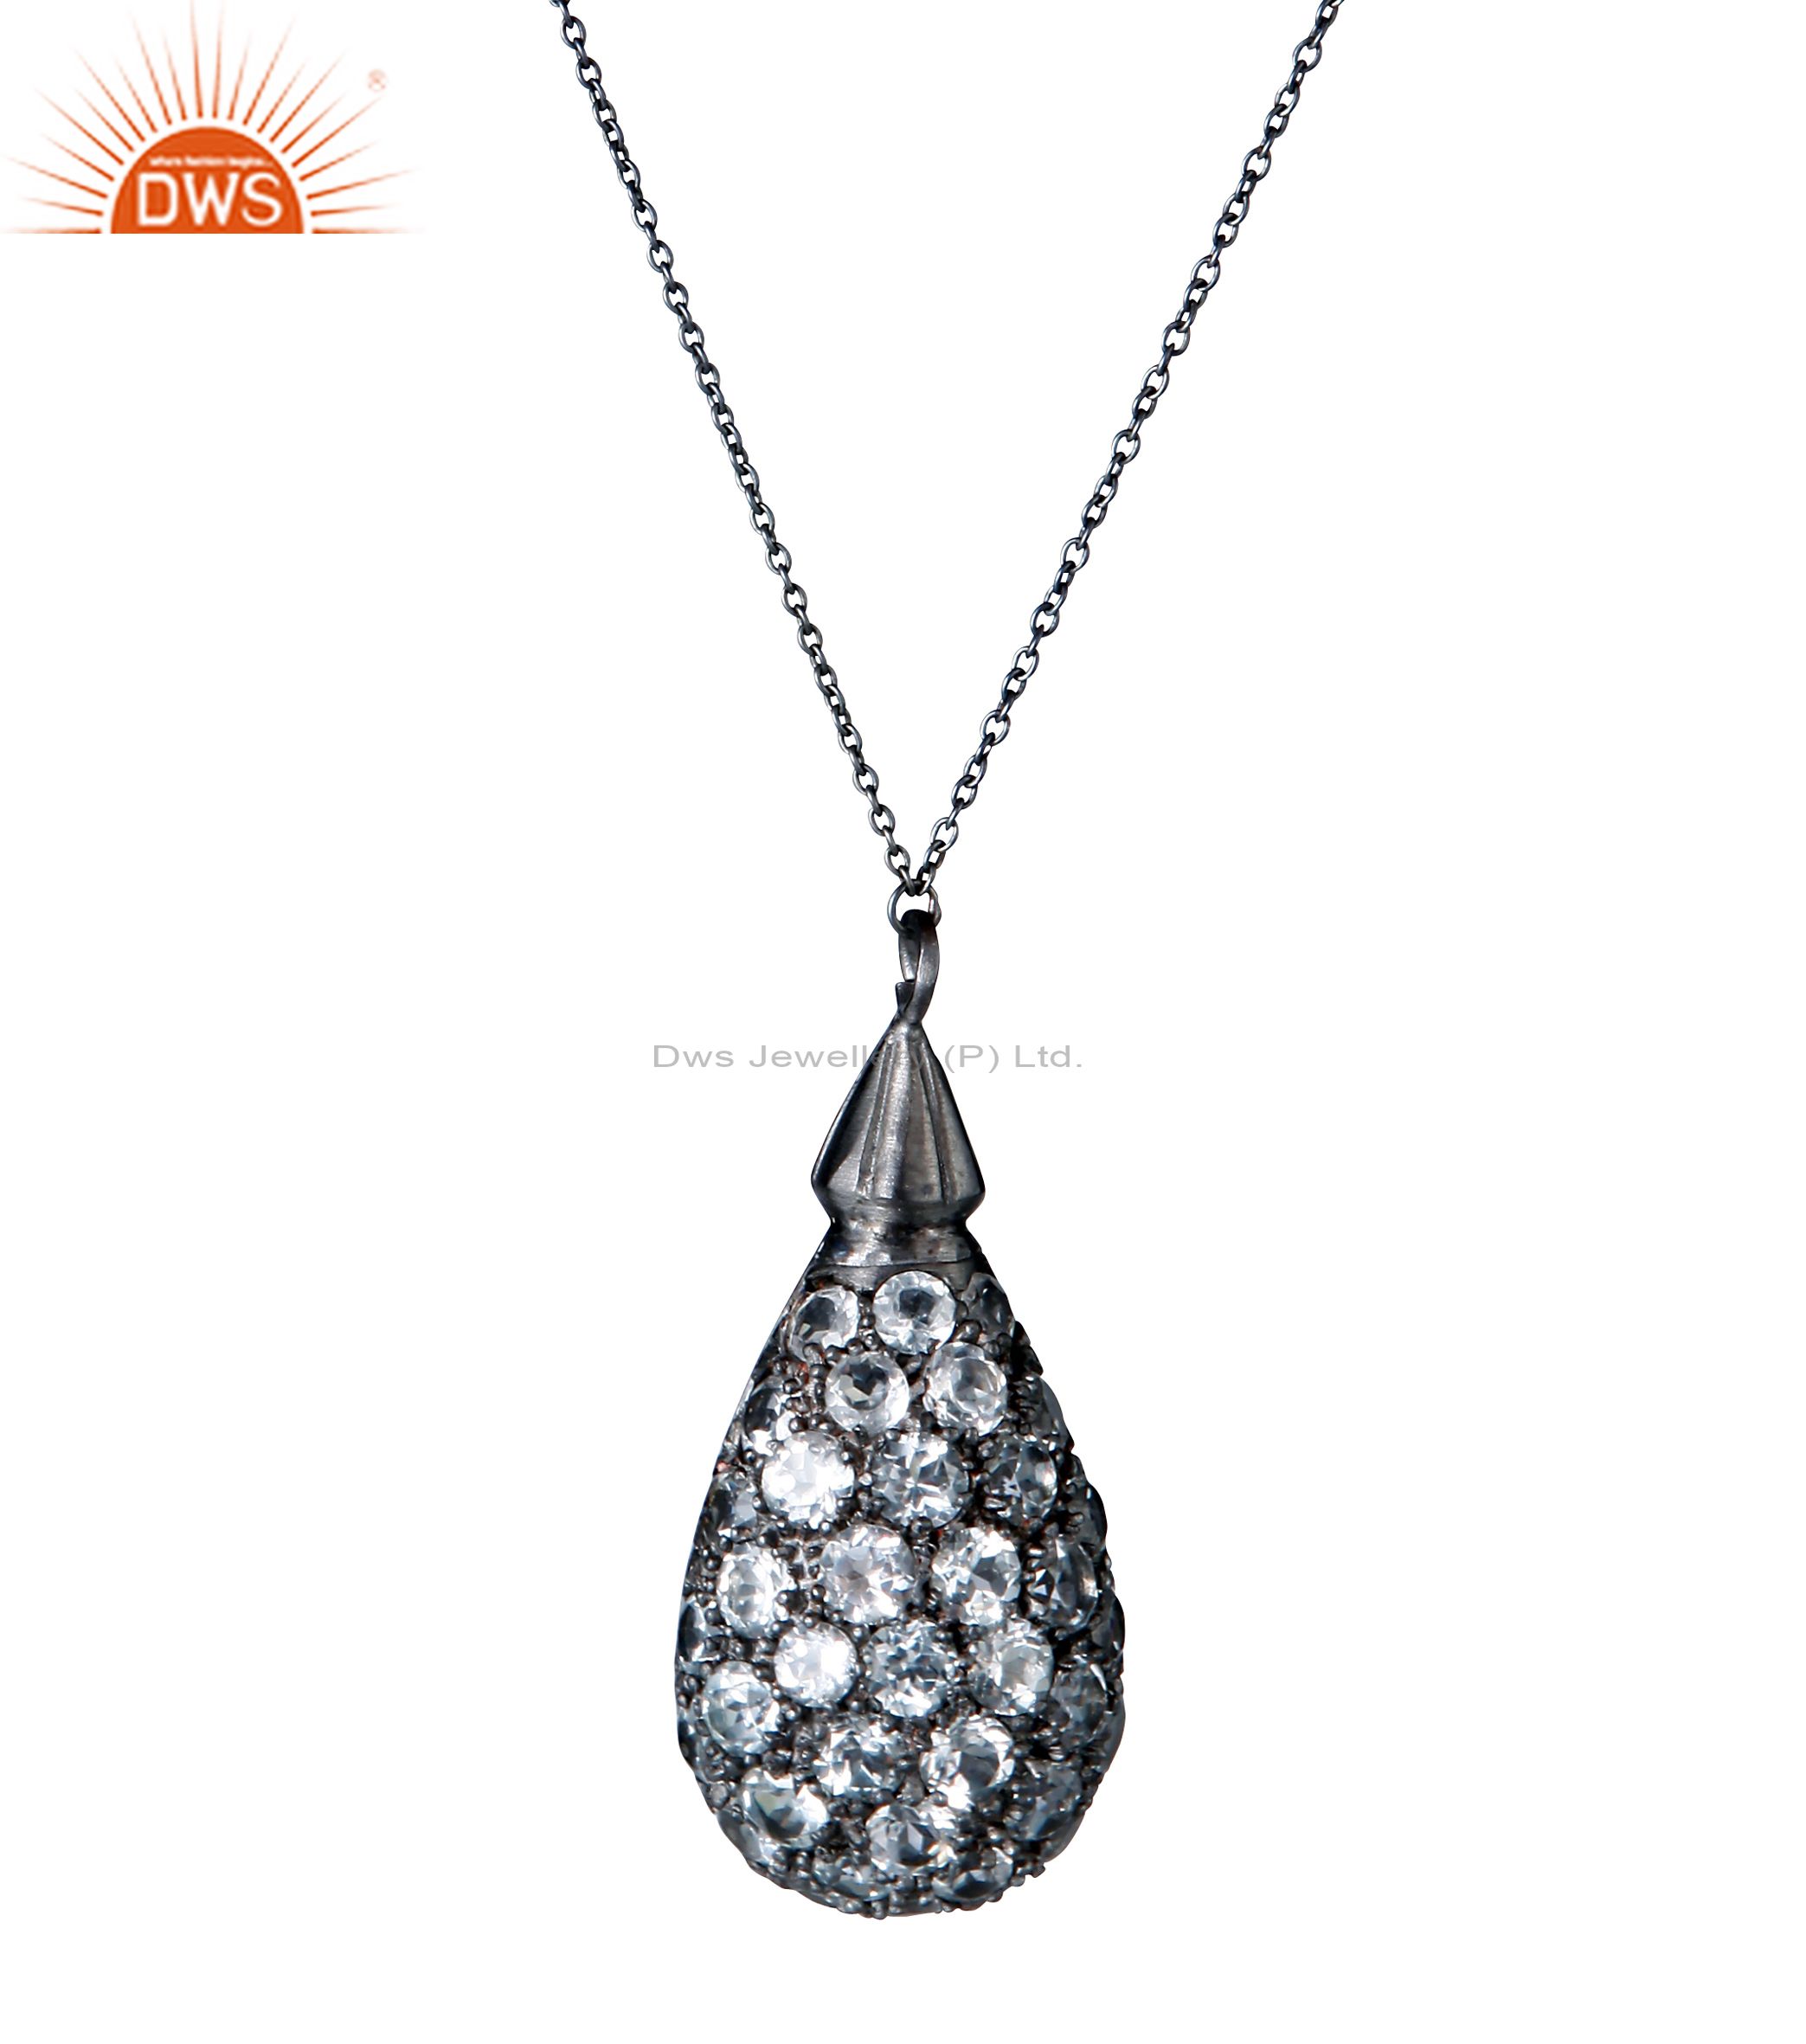 Black rhodium plated sterling silver white topaz drop pendant with chain